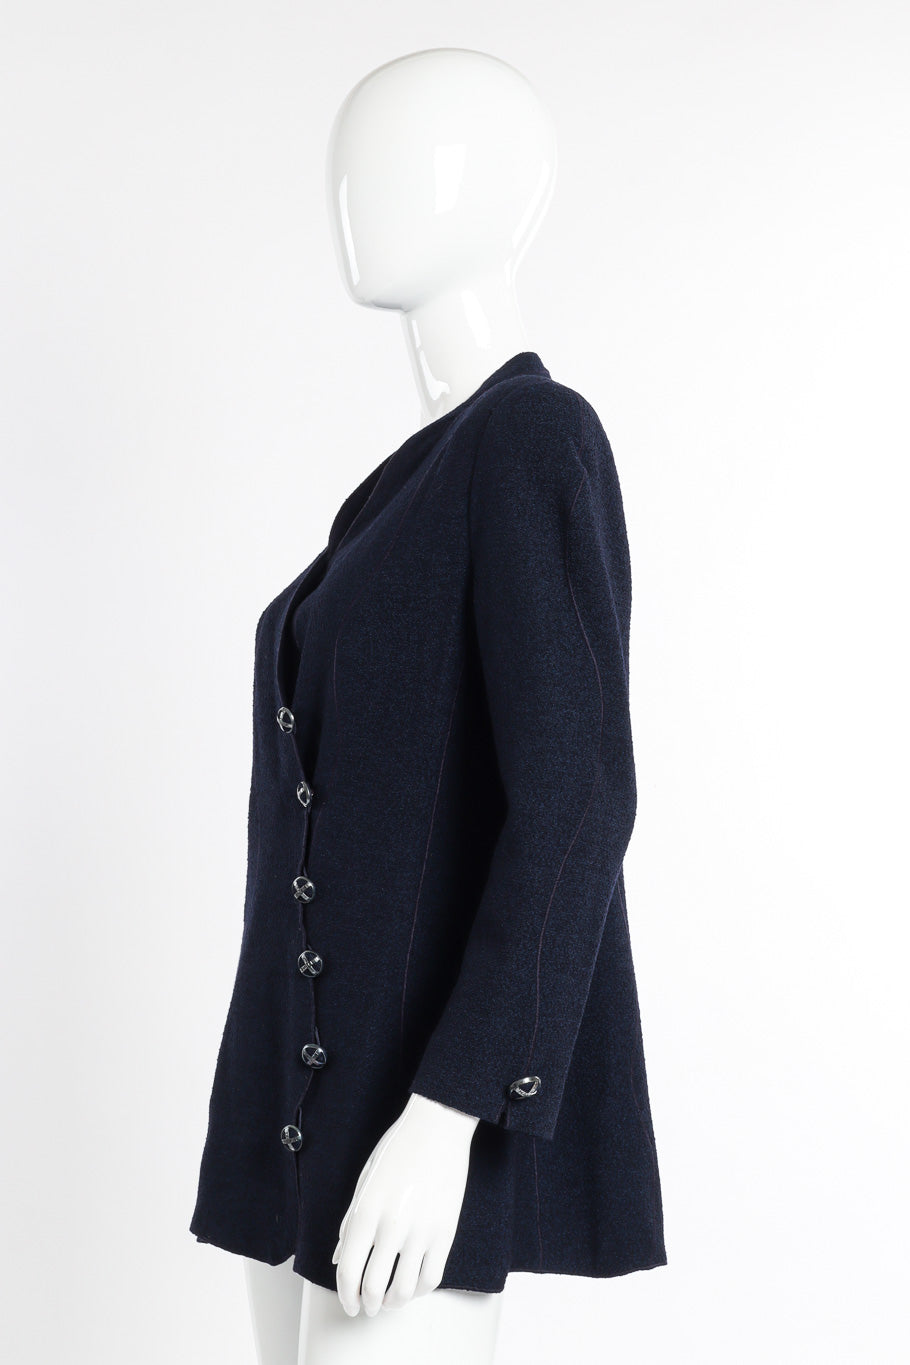 Vintage Chanel Couture Wave Wool Cardigan side view on mannequin @recessla